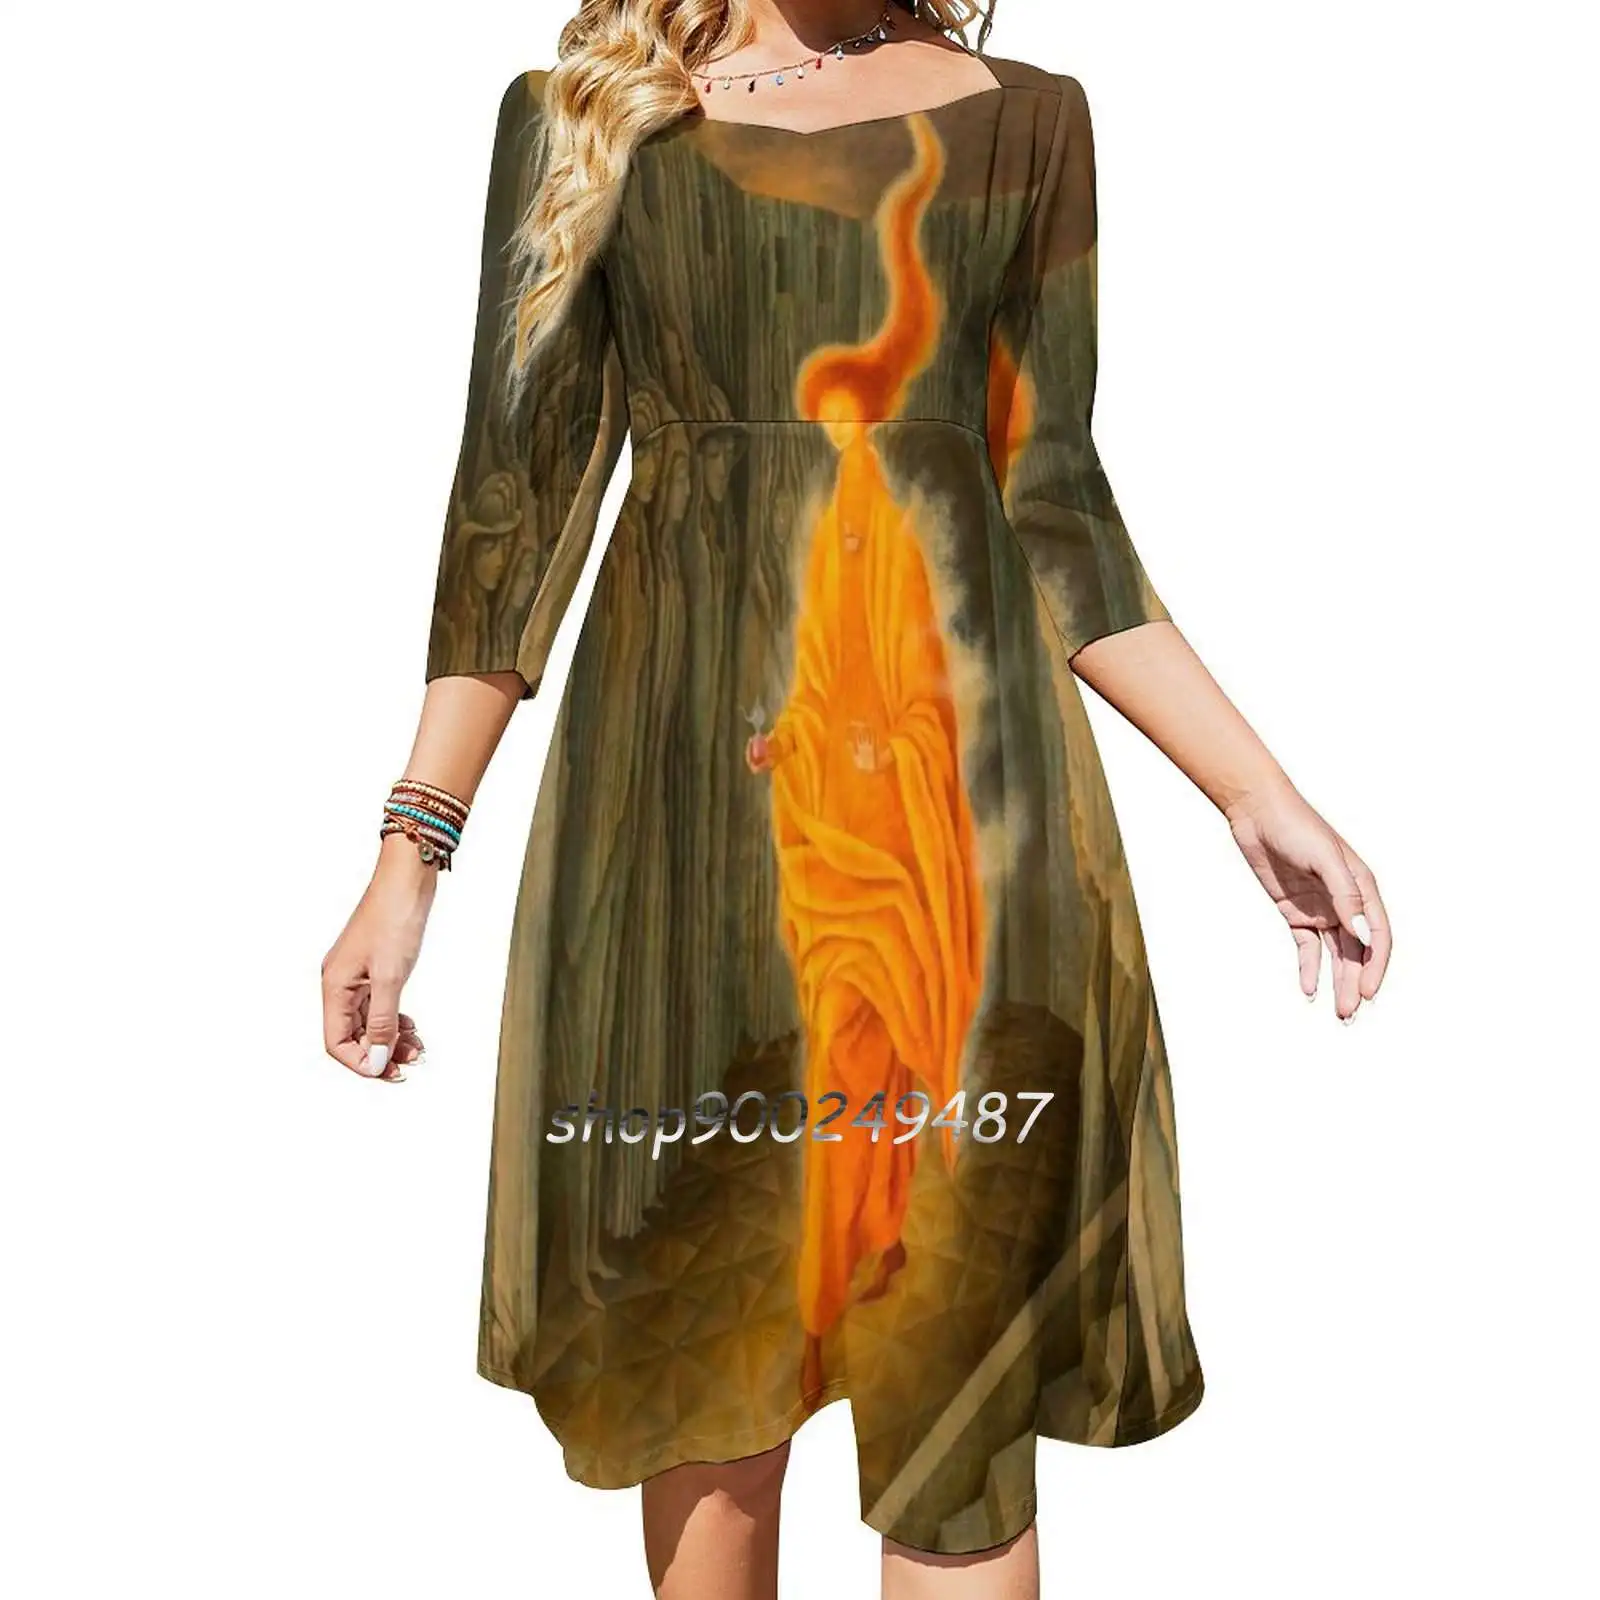 

The Call , By Remedios Varo Sweetheart Knot Flared Dress Fashion Design Large Size Loose Dress Surrealism Symbolic Fire Flames